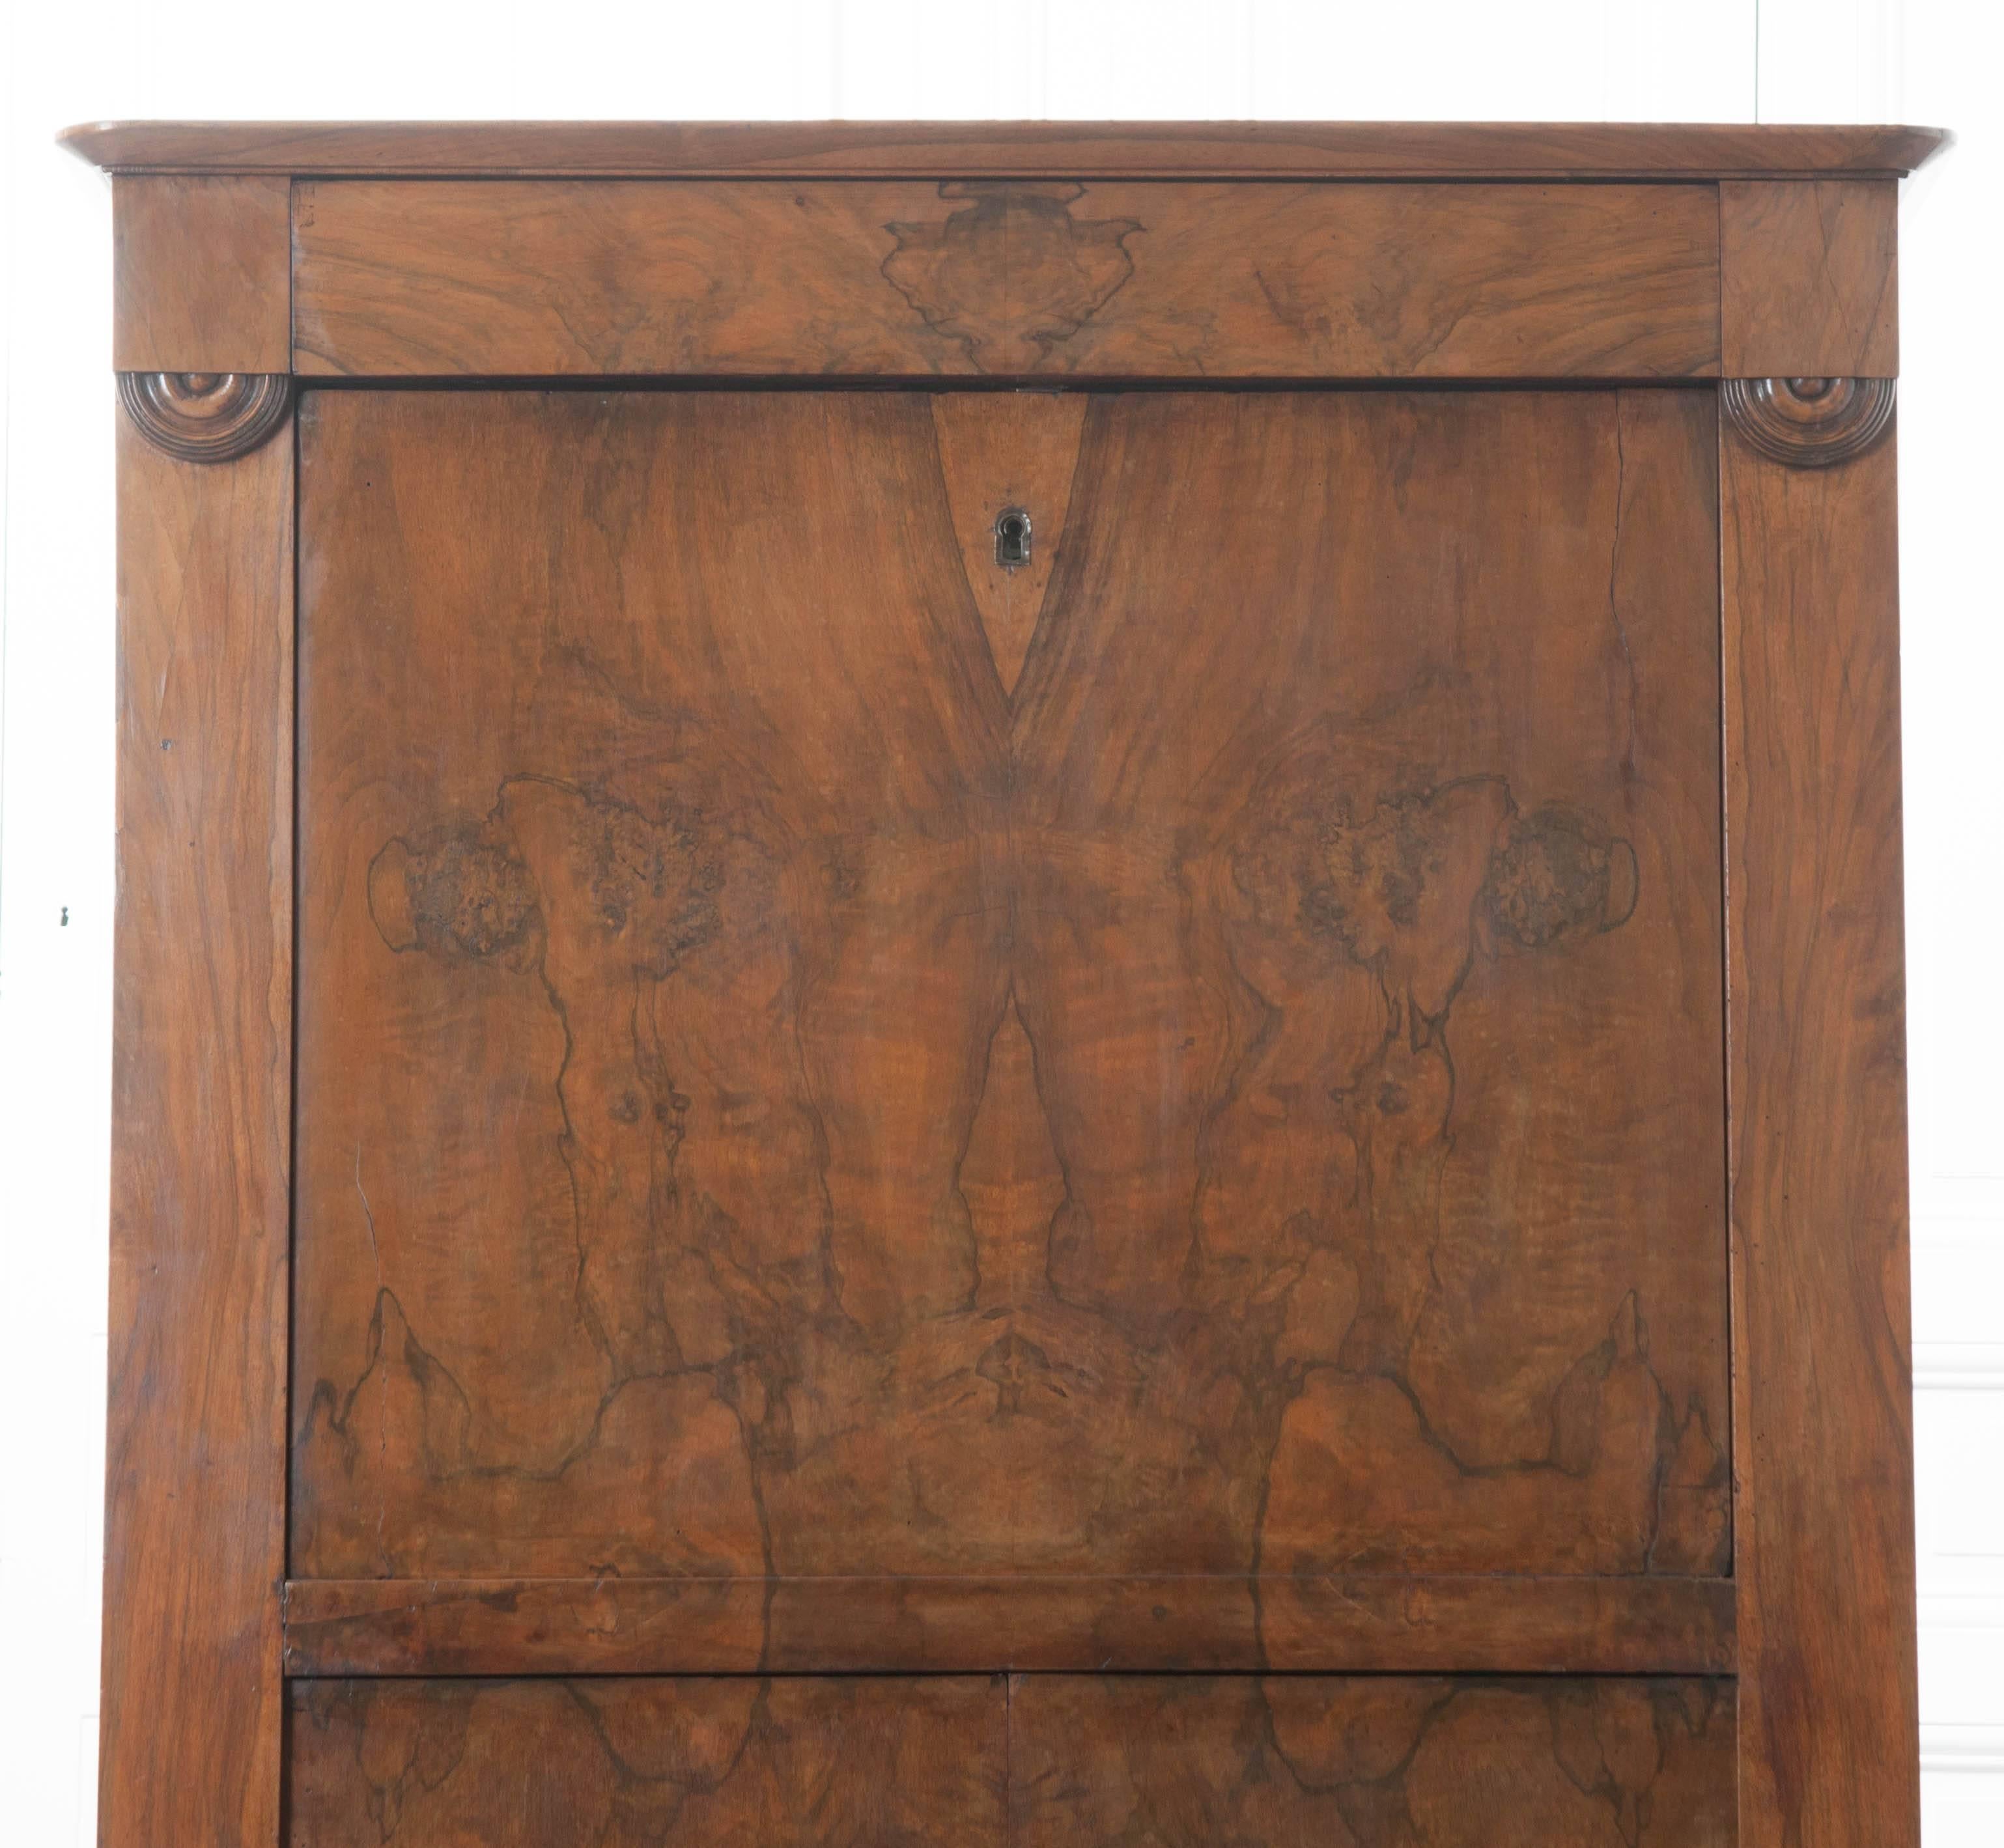 A spectacular burl walnut desk from 19th century, France. A drawer can be found at the top of the desk with no hardware. The front of the desk folds down, revealing a leather topped work surface, storage and five drawers that will aid in keeping